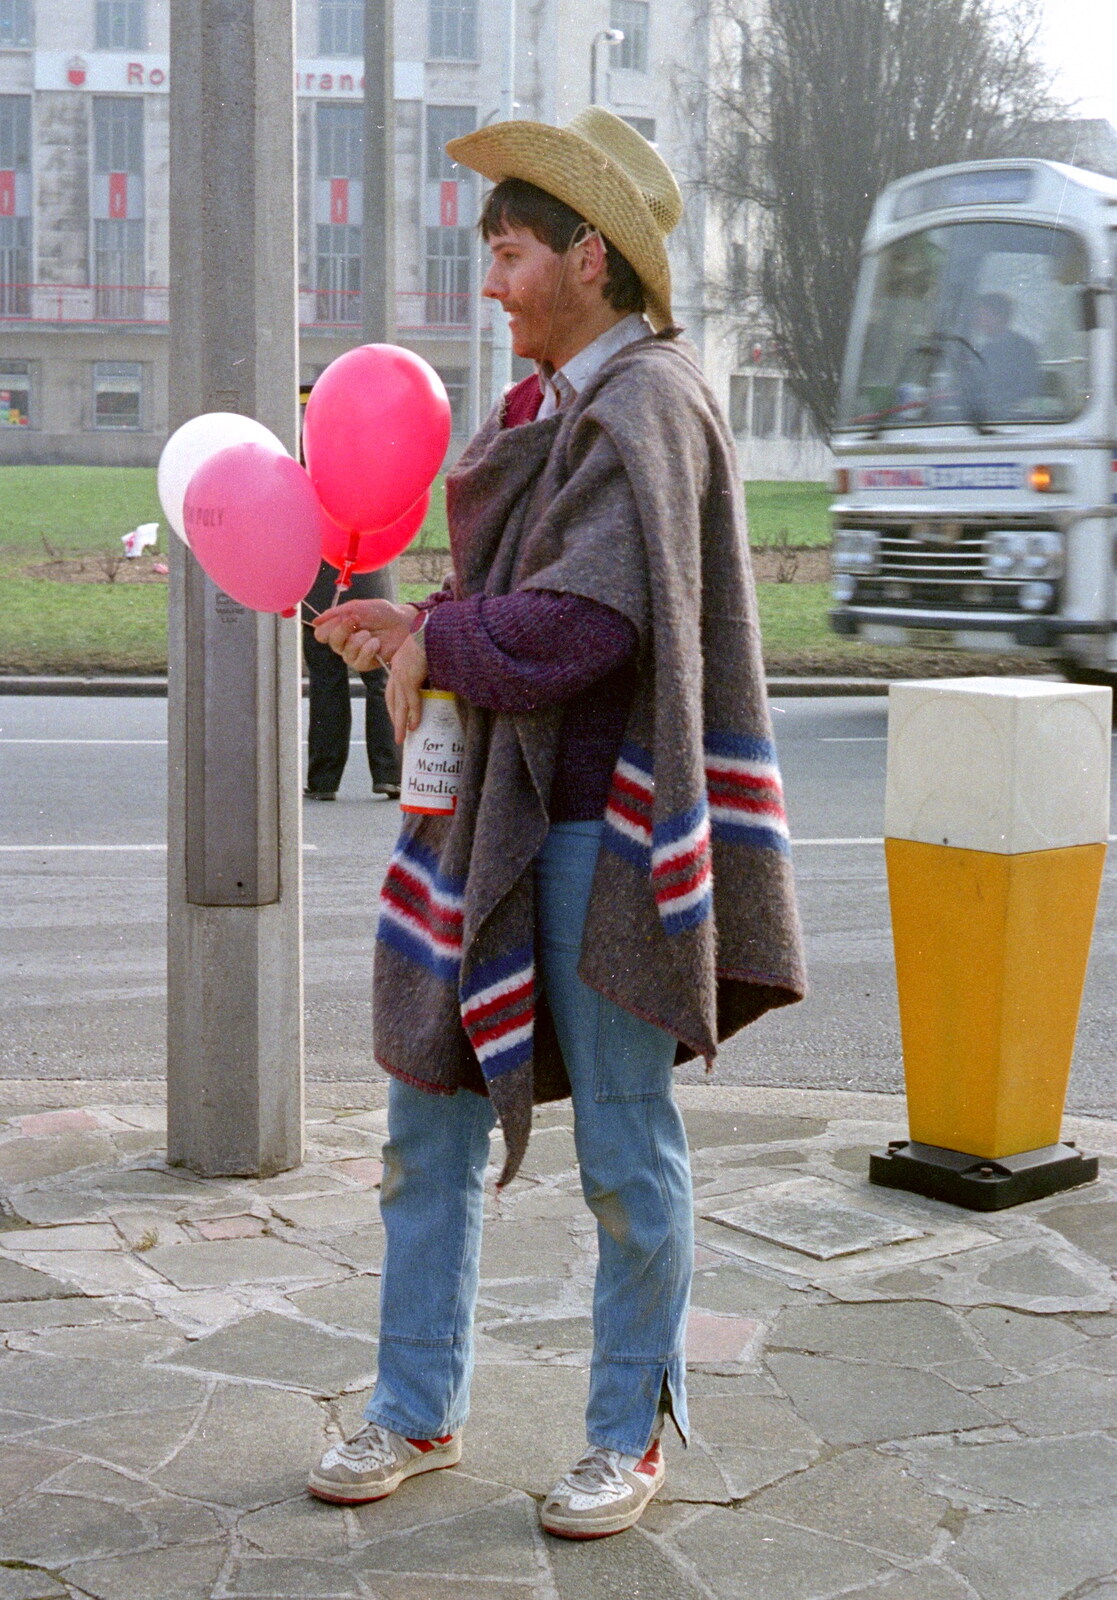 A 'Mexican' with balloons from Uni: PPSU "Jazz" RAG Street Parade, Plymouth, Devon - 17th February 1986